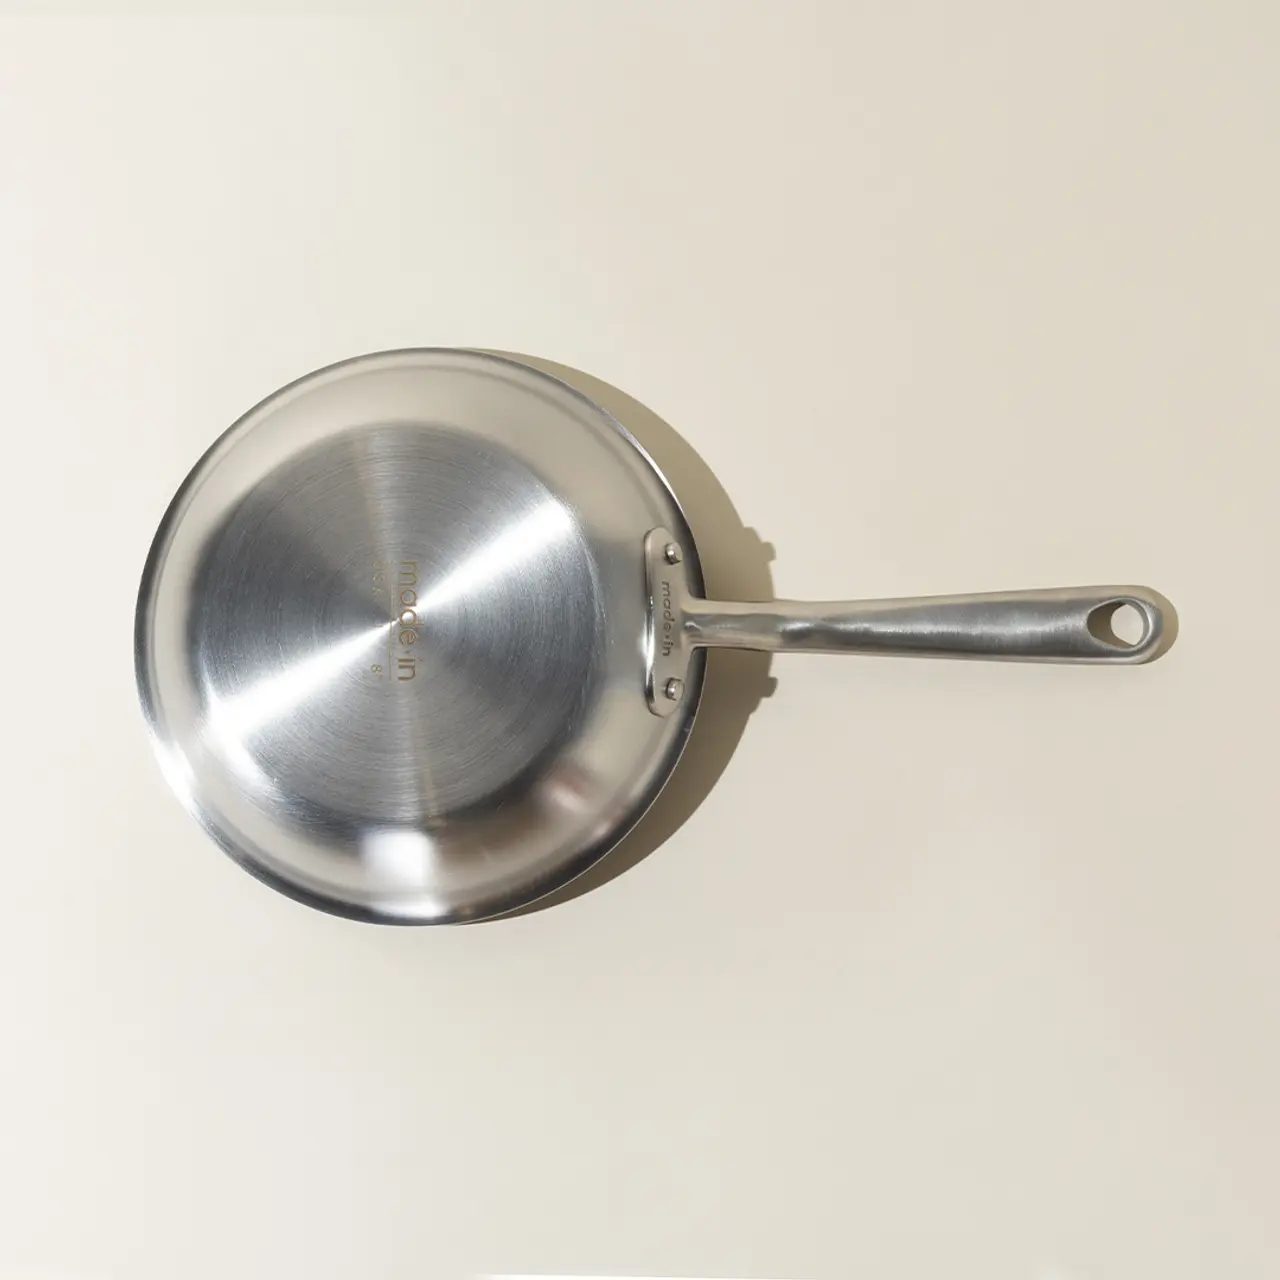 A stainless steel frying pan with a long handle is mounted on a pale background, casting a soft shadow.